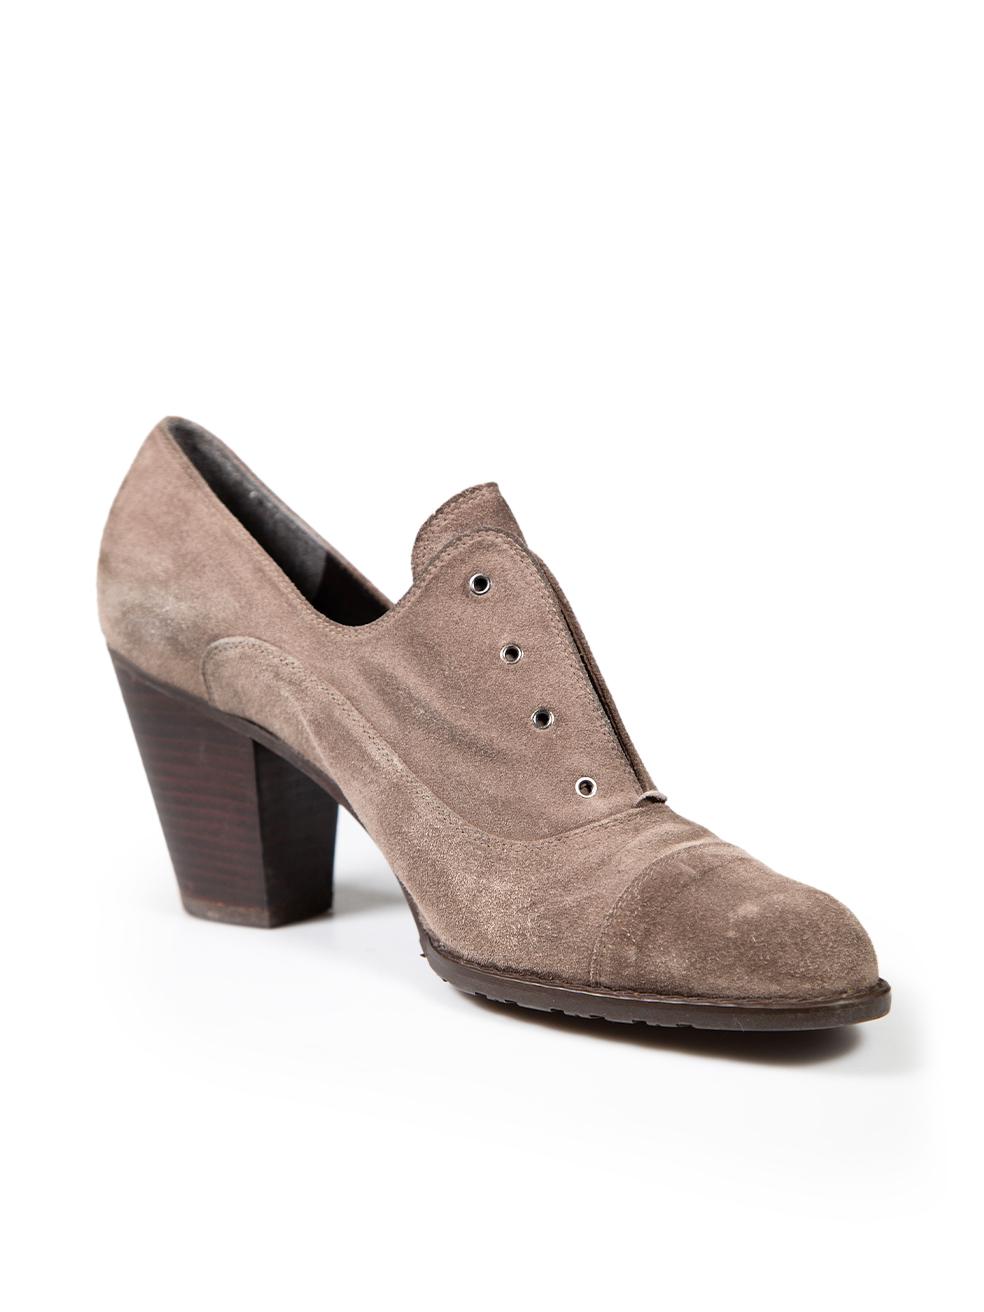 CONDITION is Very good. Minimal wear to heels is evident. General light wear to suede uppers and toe edges and fading of the inside brand label on insole on this used Stuart Weizman designer resale item.
 
 
 
 Details
 
 
 Brown
 
 Suede
 
 Heels
